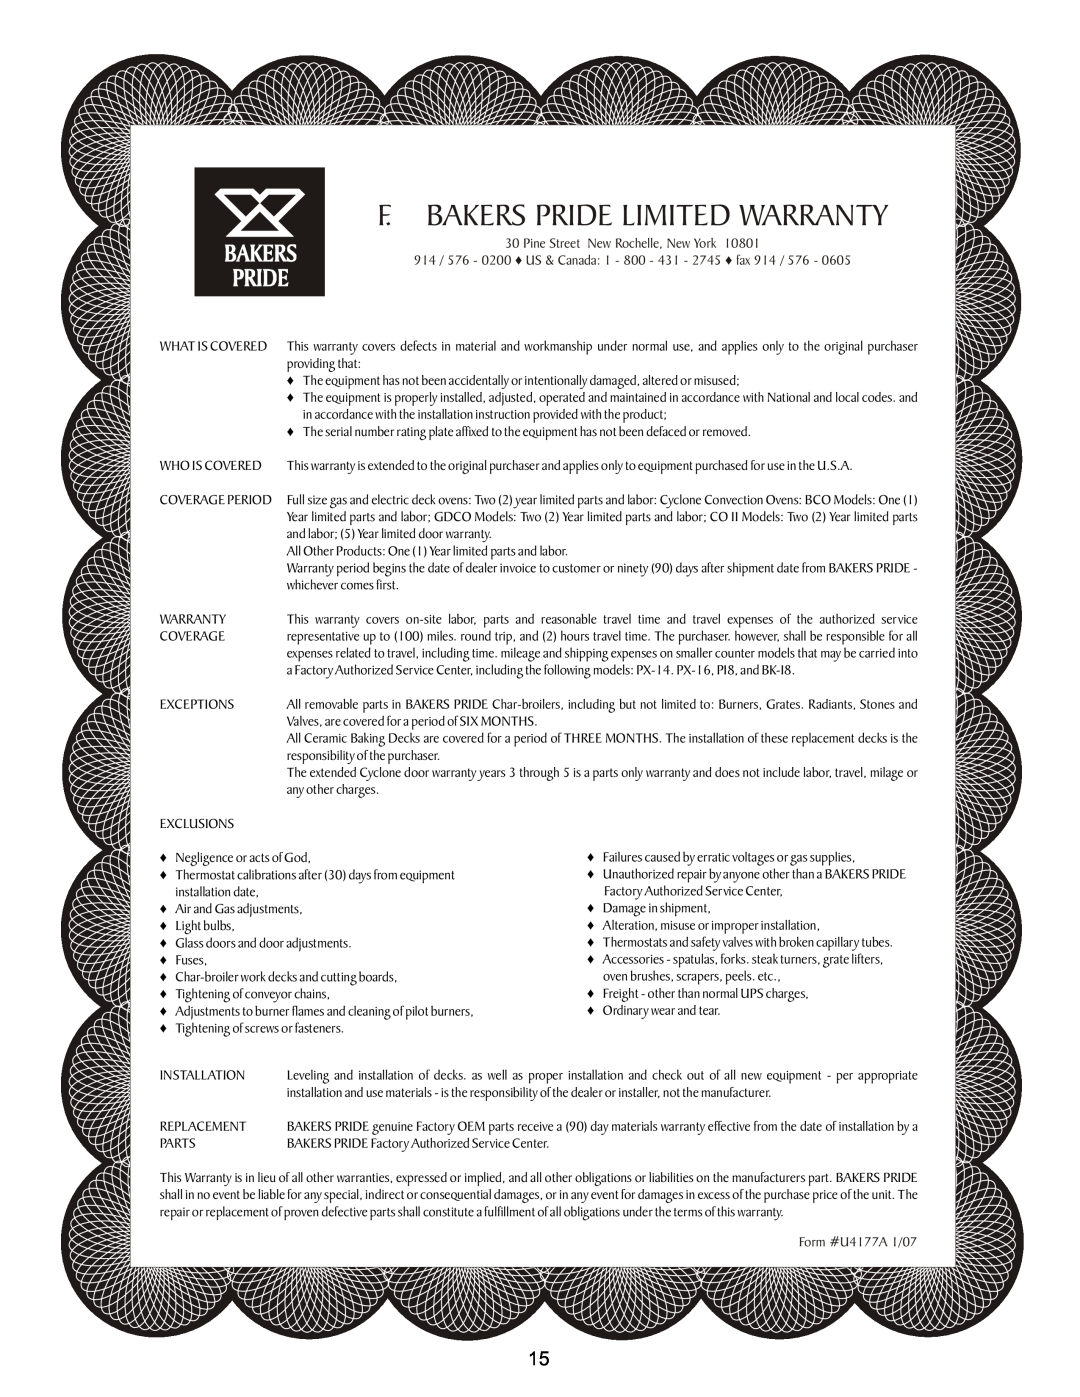 Bakers Pride Oven GDCO-E, BCO-E F. Bakers Pride Limited Warranty, Pine Street New Rochelle, New York, Form #U4177A 1/07 